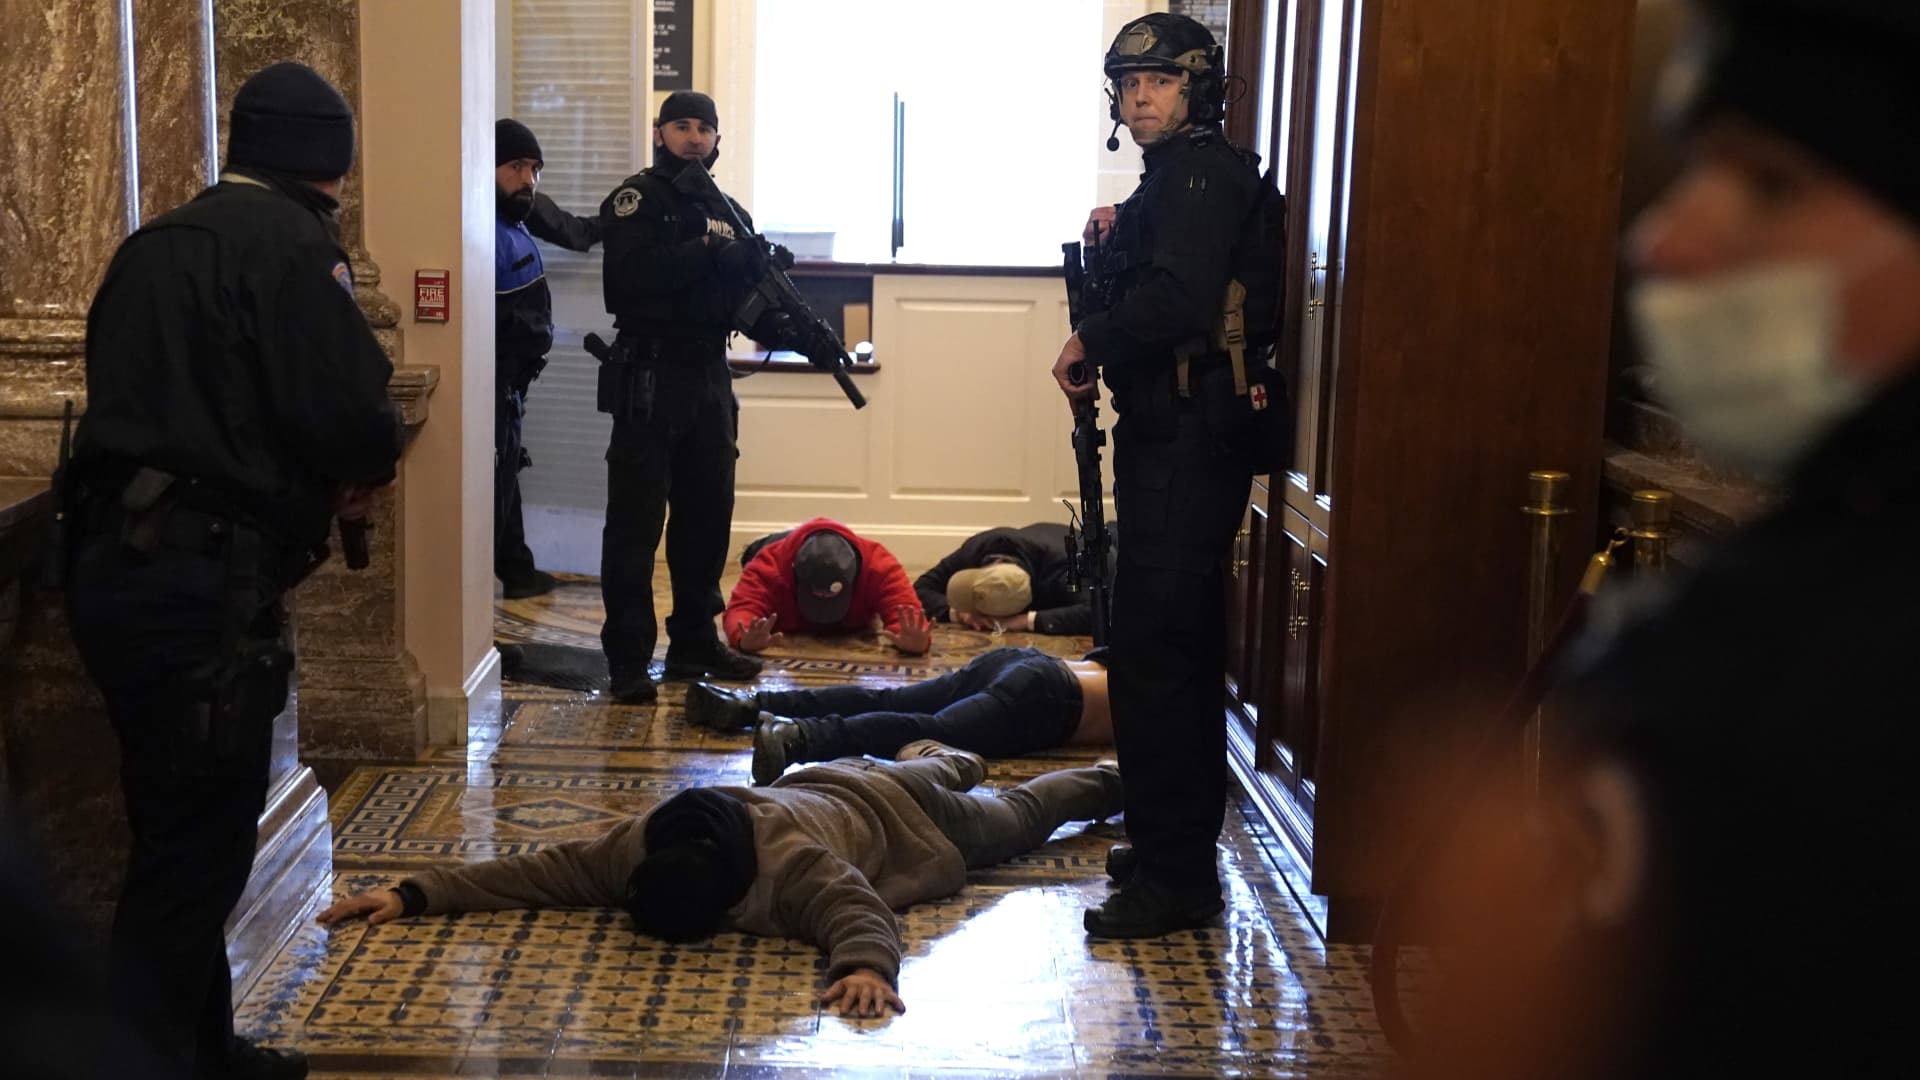 U.S. Capitol Police stand detain protesters outside of the House Chamber during a joint session of Congress on January 06, 2021 in Washington, DC.